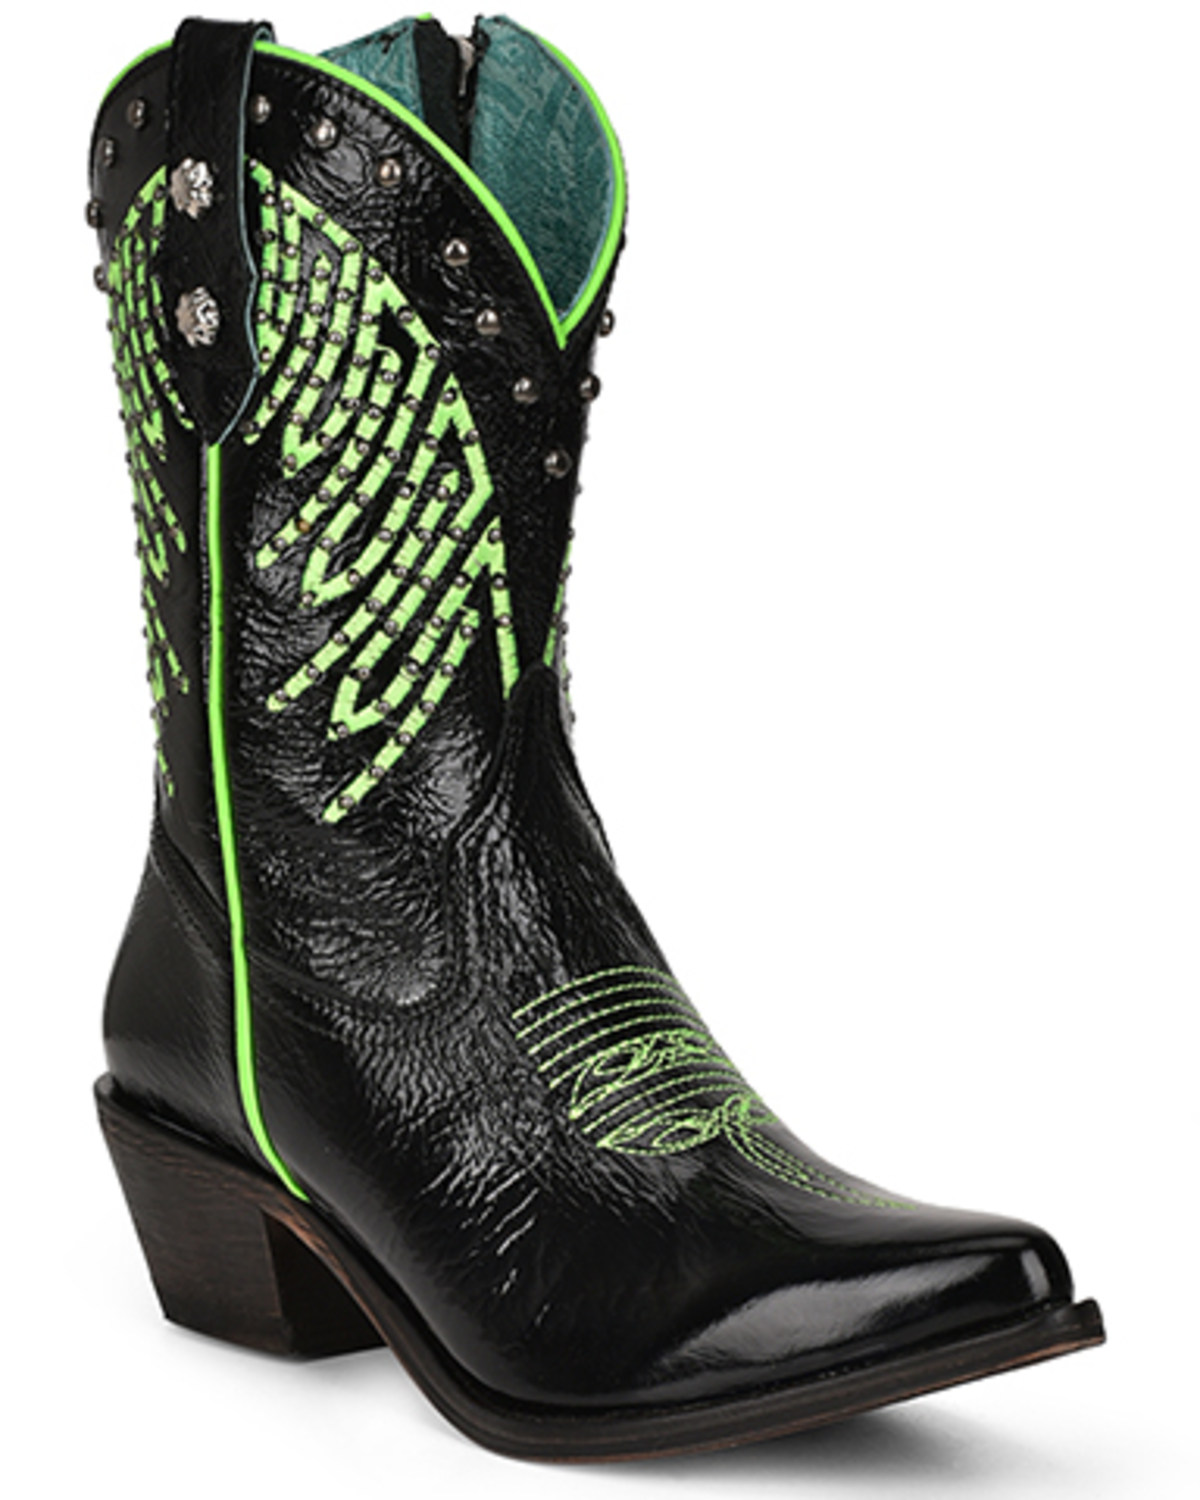 Corral Women's Fluorescent Embroidered and Studded Western Boots